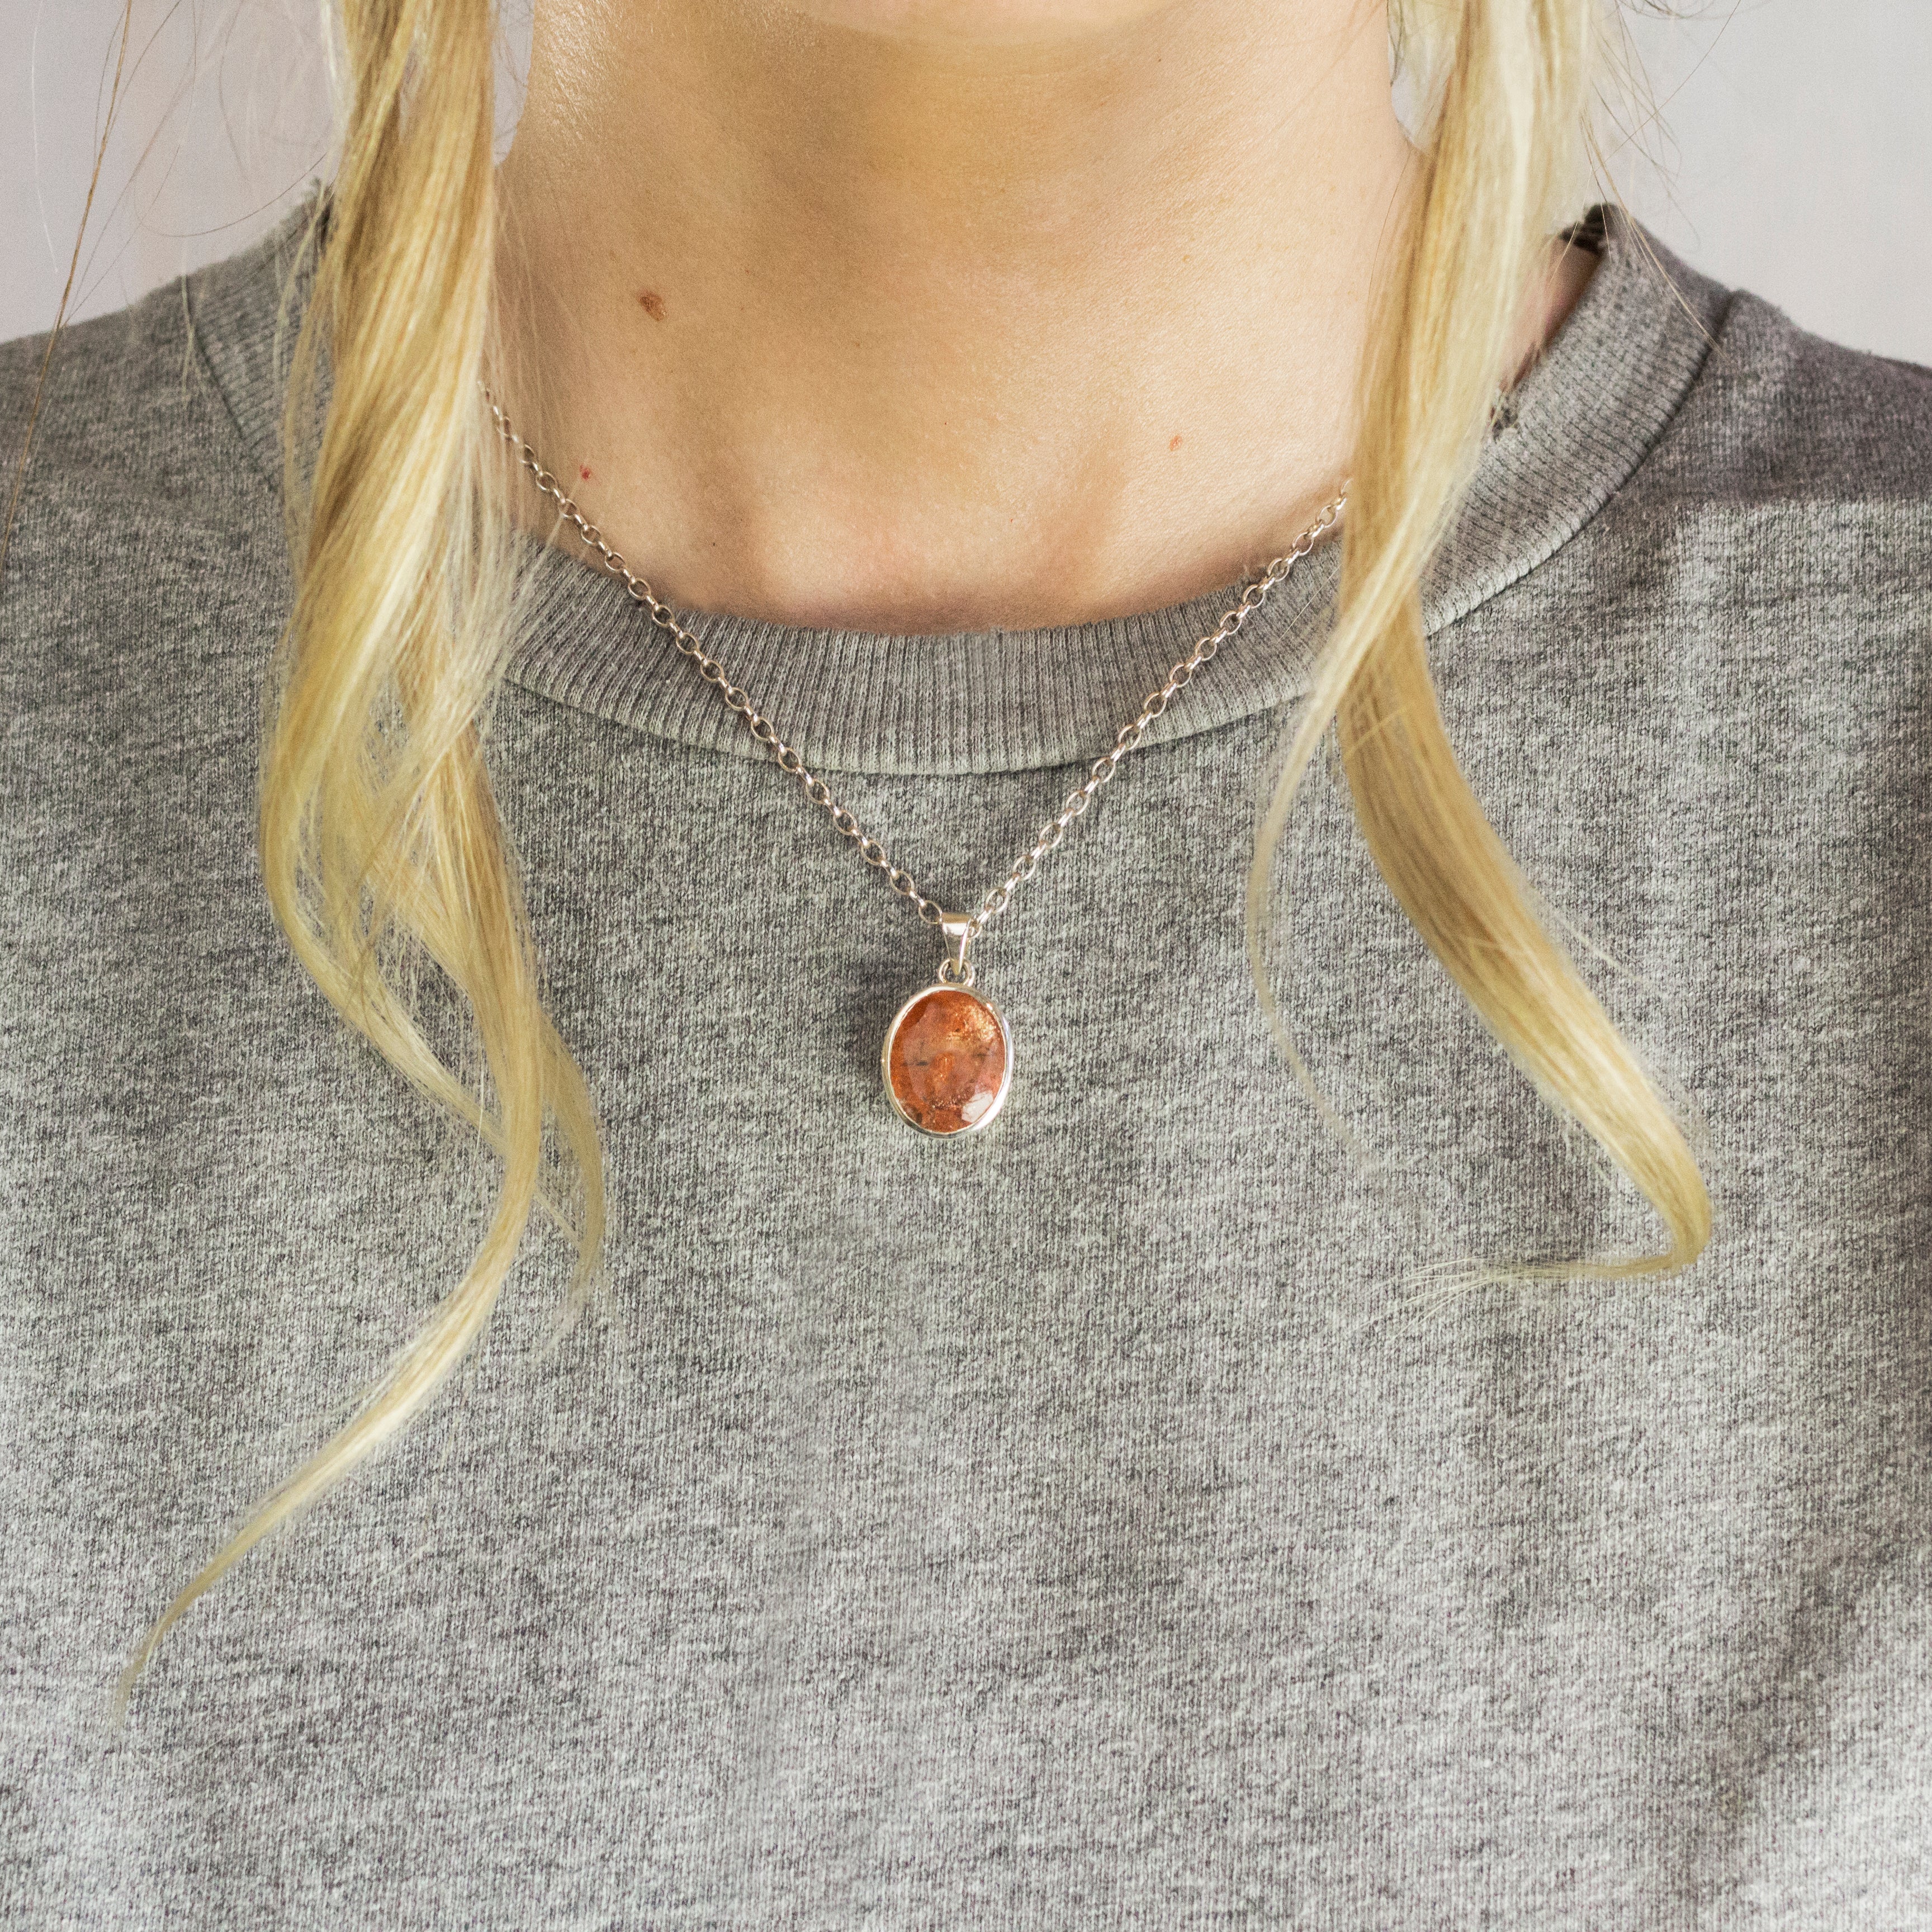 Oval Faceted Sunstone Necklace in Sterling Silver Featured On Model